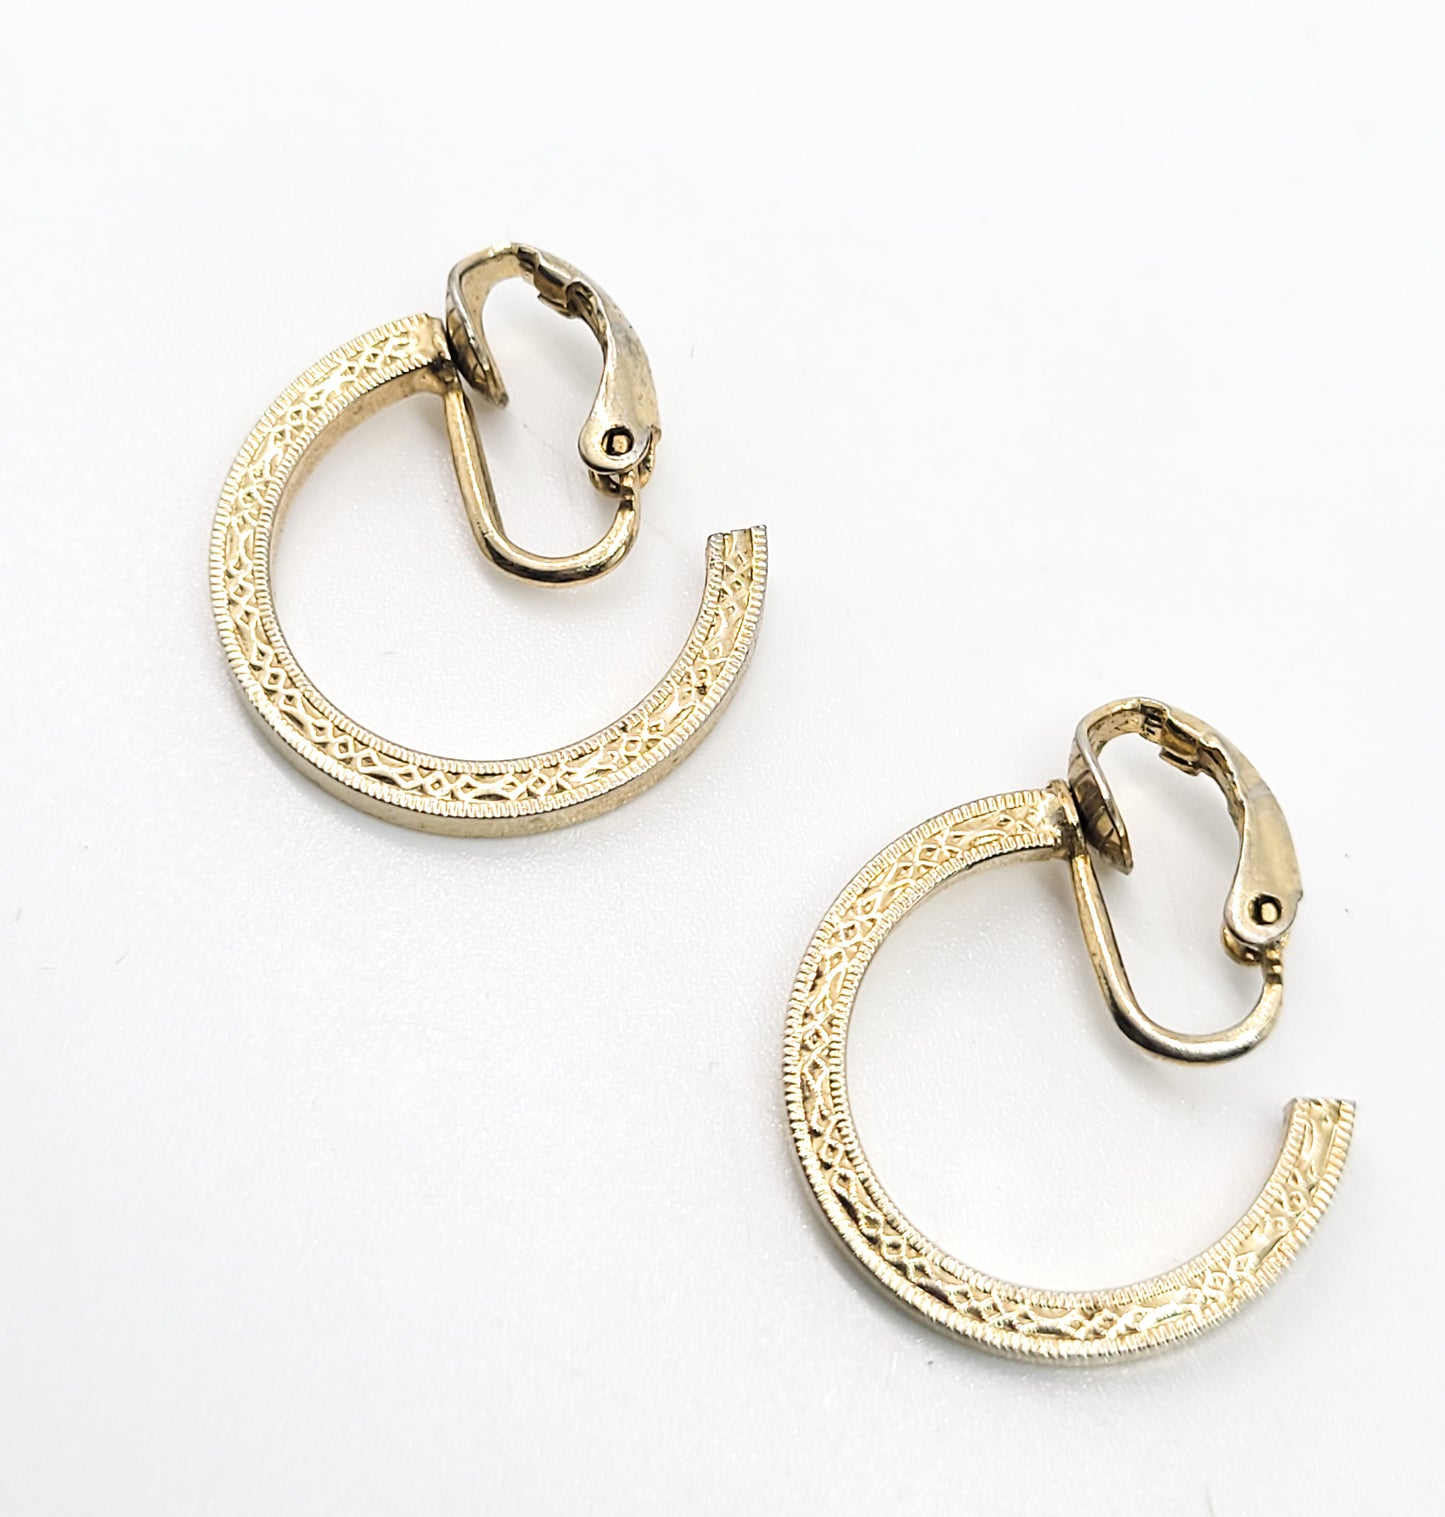 Beautifuly etched Retro gold toned vintage hoop clip on earrings